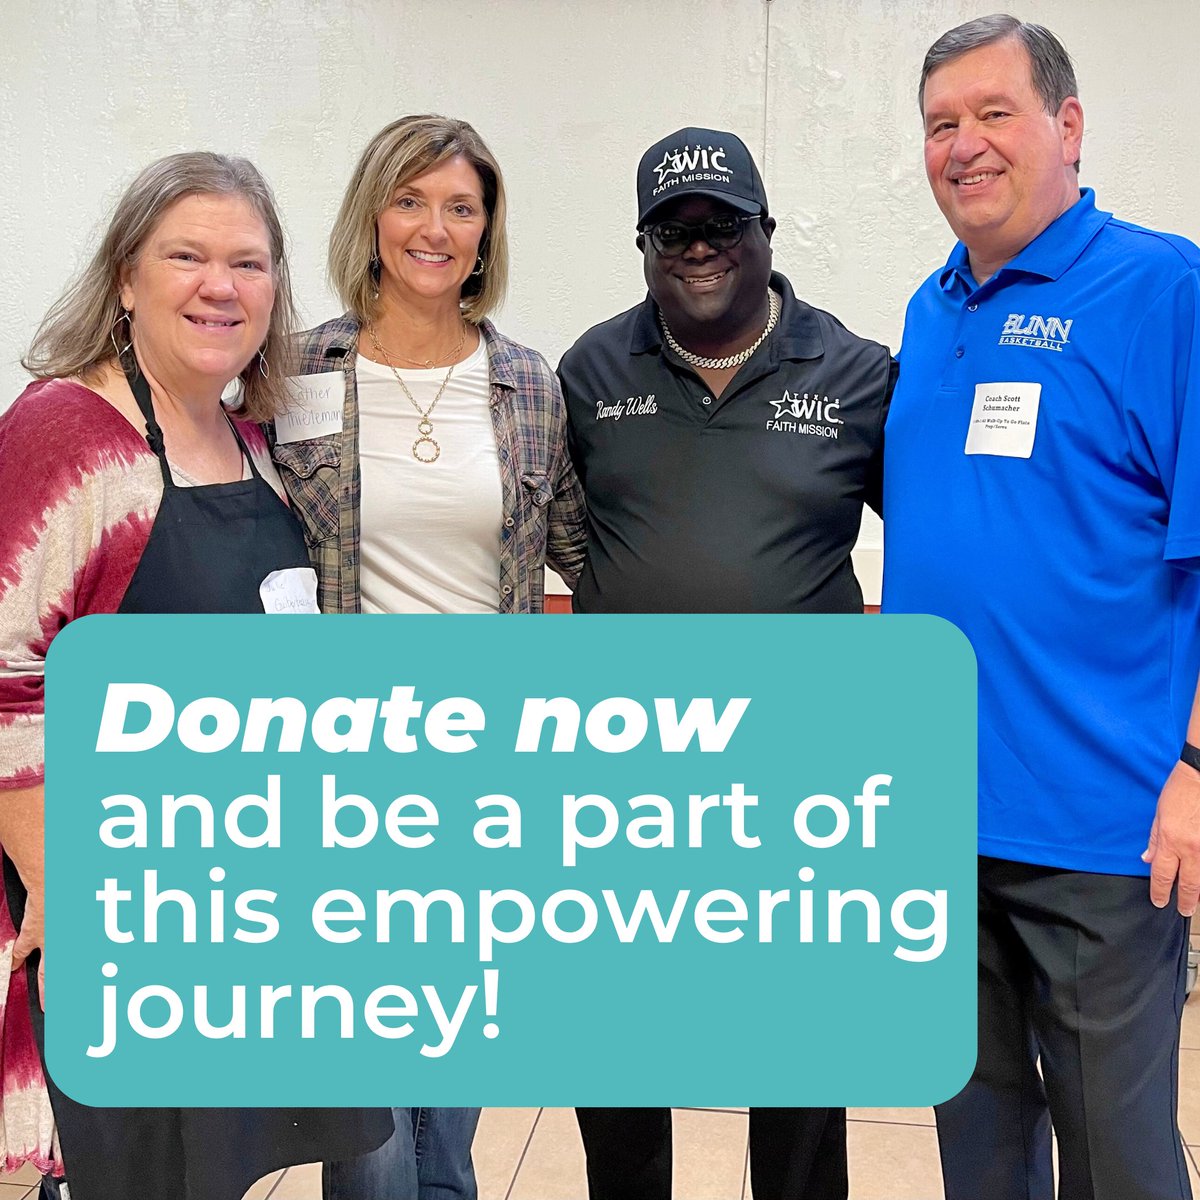 Join us in the Faith Mission Cannery Center Capital Campaign! 🌟We're aiming to raise money for vital campus renovations. With your support, we can enhance our facilities and services, creating a stronger, more resilient community. 💻Donate now at faithmission.us/#donate.